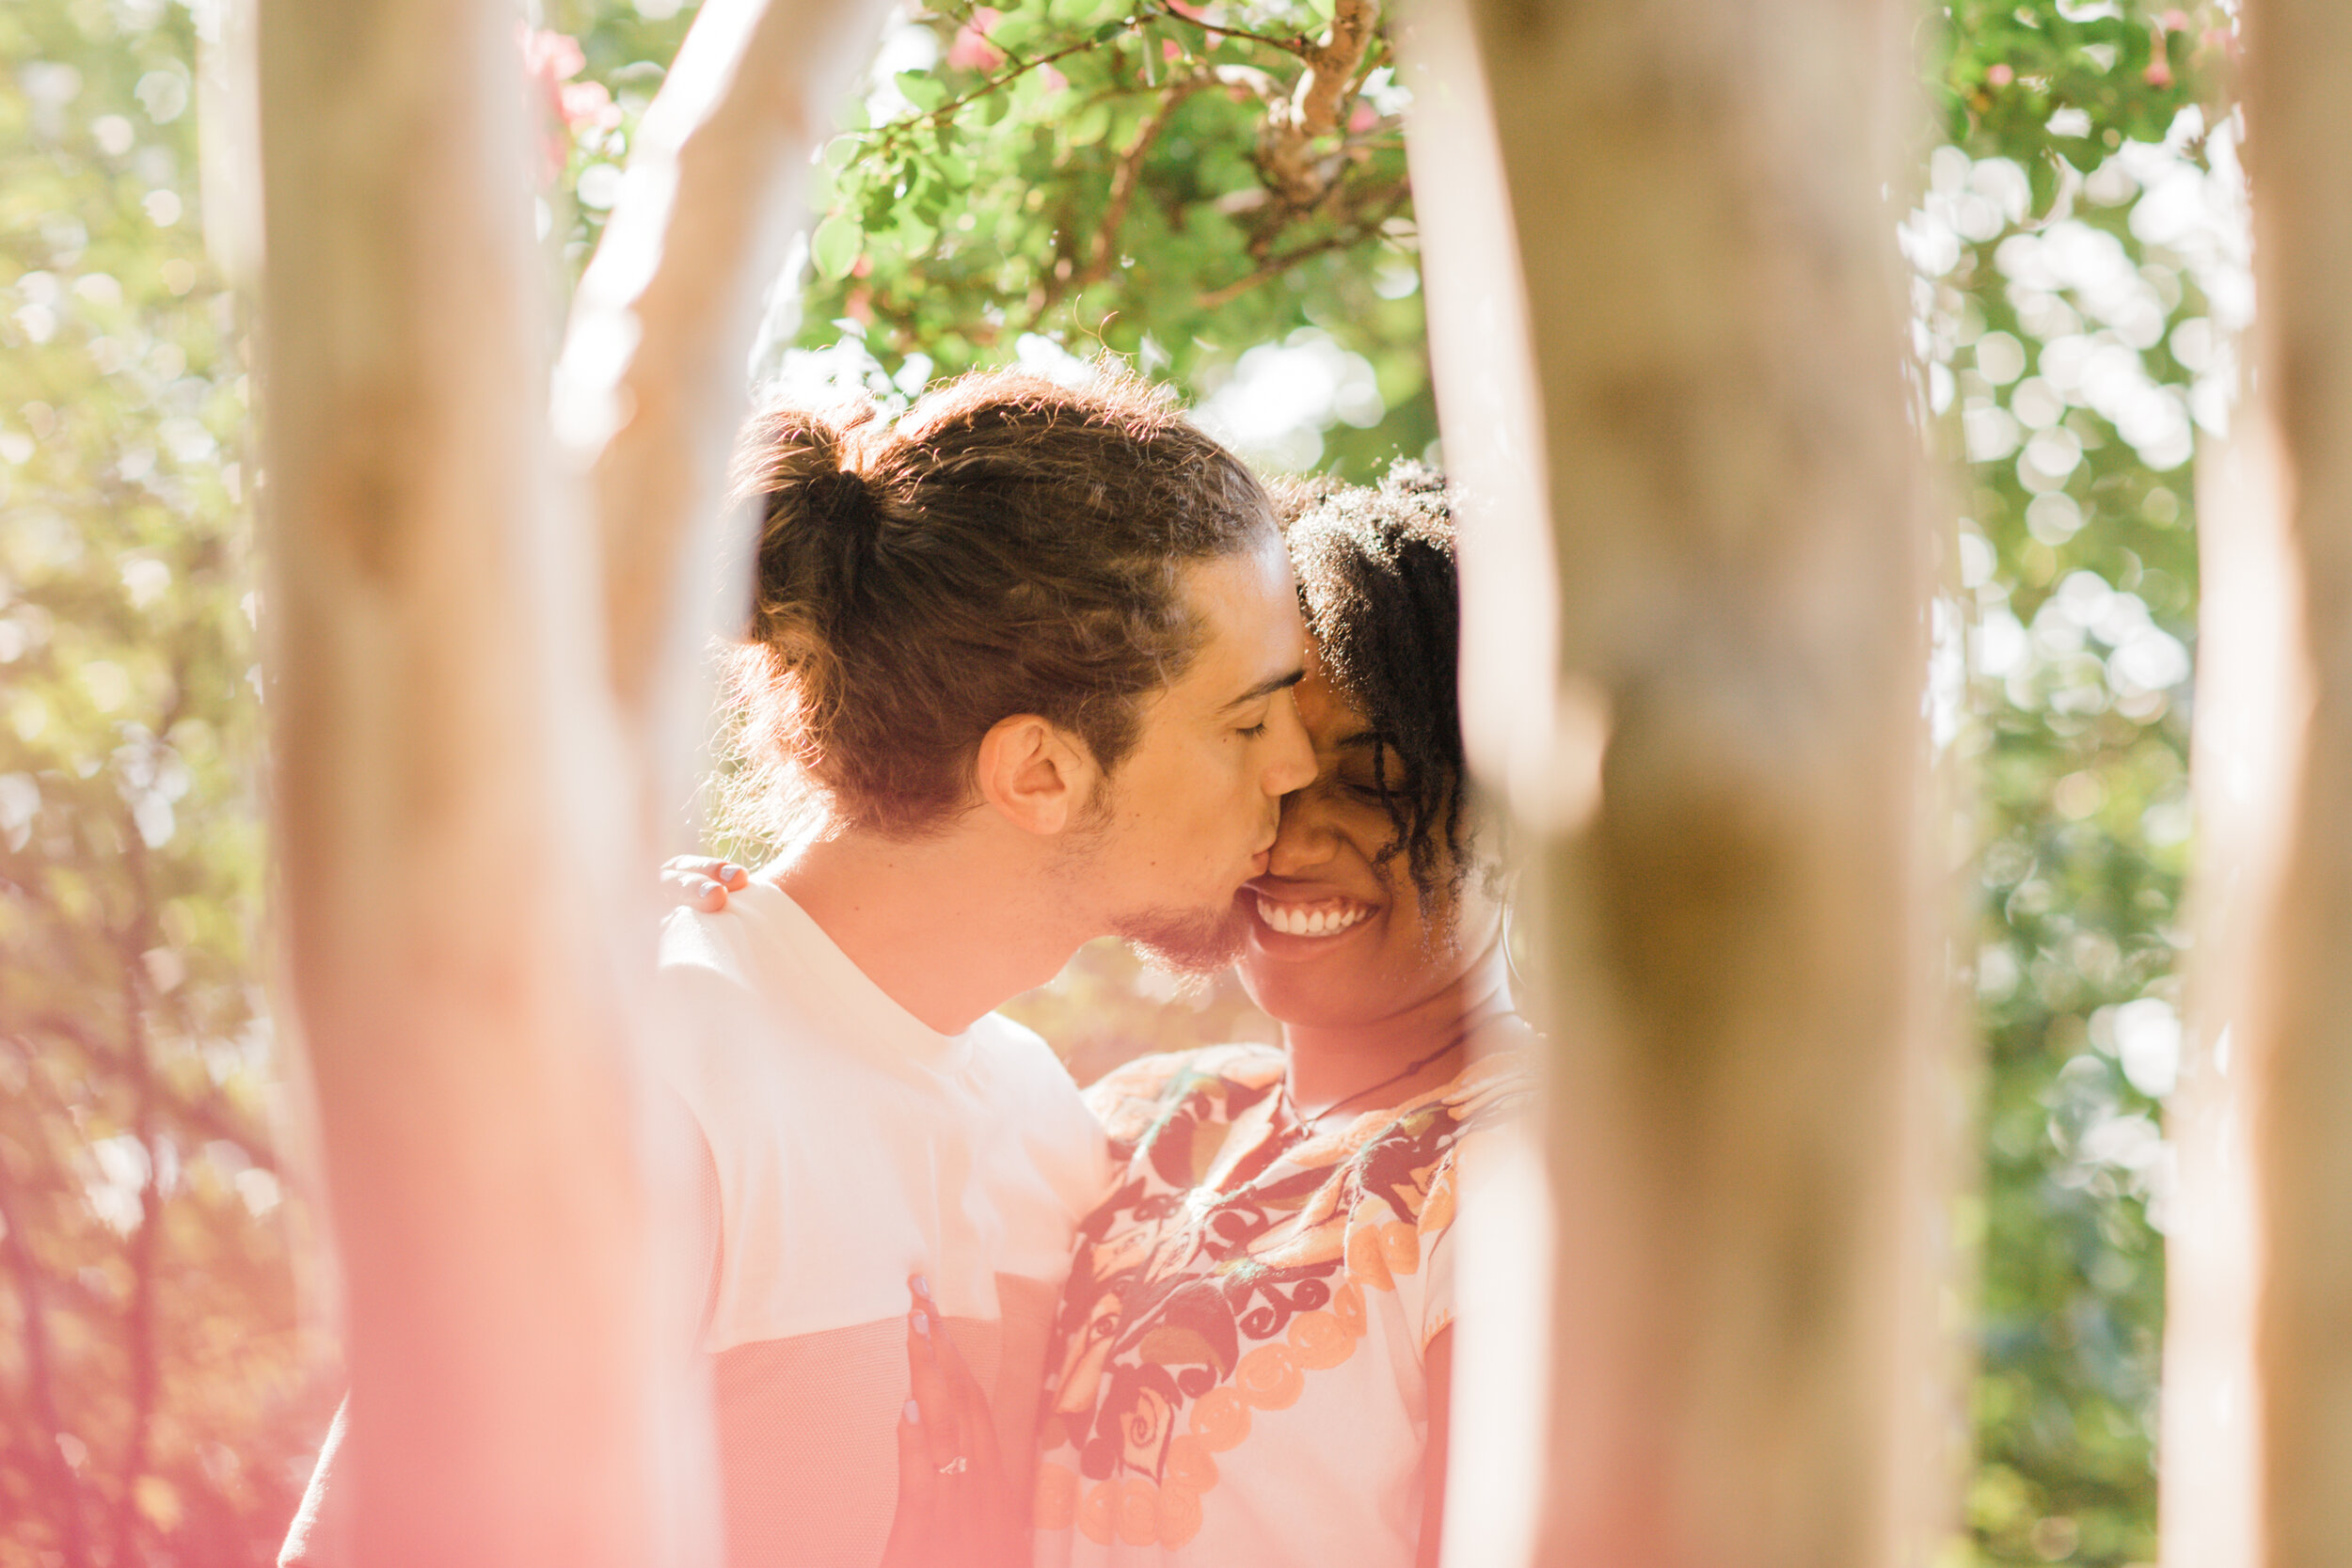 Golden Hour Engagement Session in Baltimore Maryland Patterson Park Pagoda DC Wedding Photographers Megapixels Media Photography and Videography Mixed Couple Multiracial Bride and Groom-46.jpg